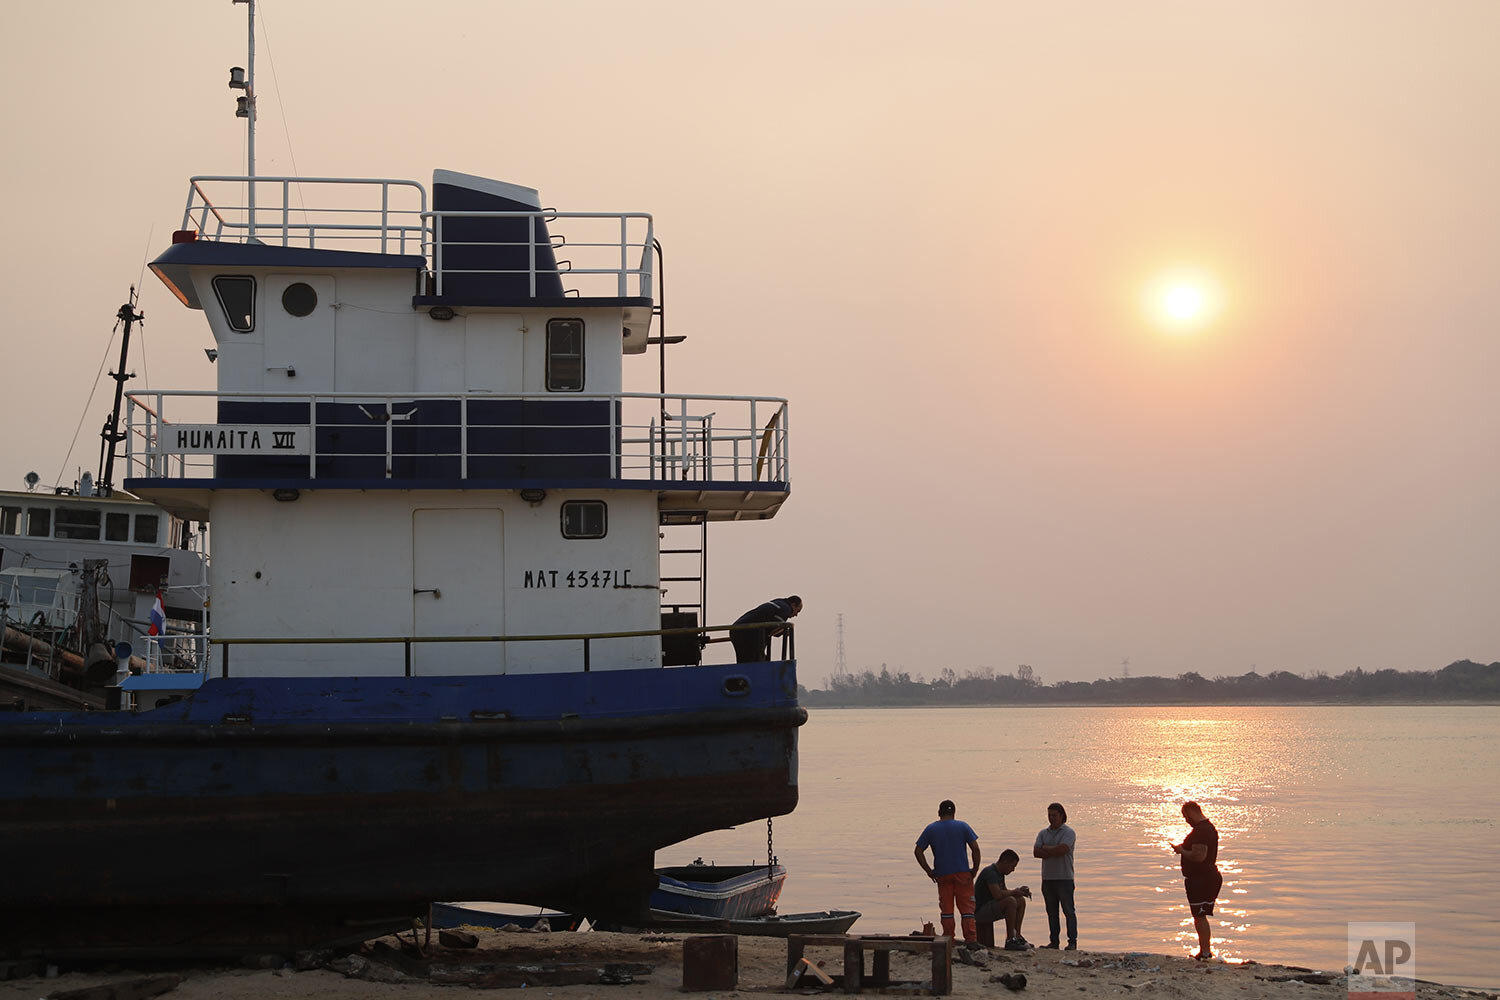  Workers rest at sunset on the shore of the Paraguay River in Asuncion, Paraguay, Wednesday, Oct. 7, 2020. (AP Photo/Jorge Saenz) 